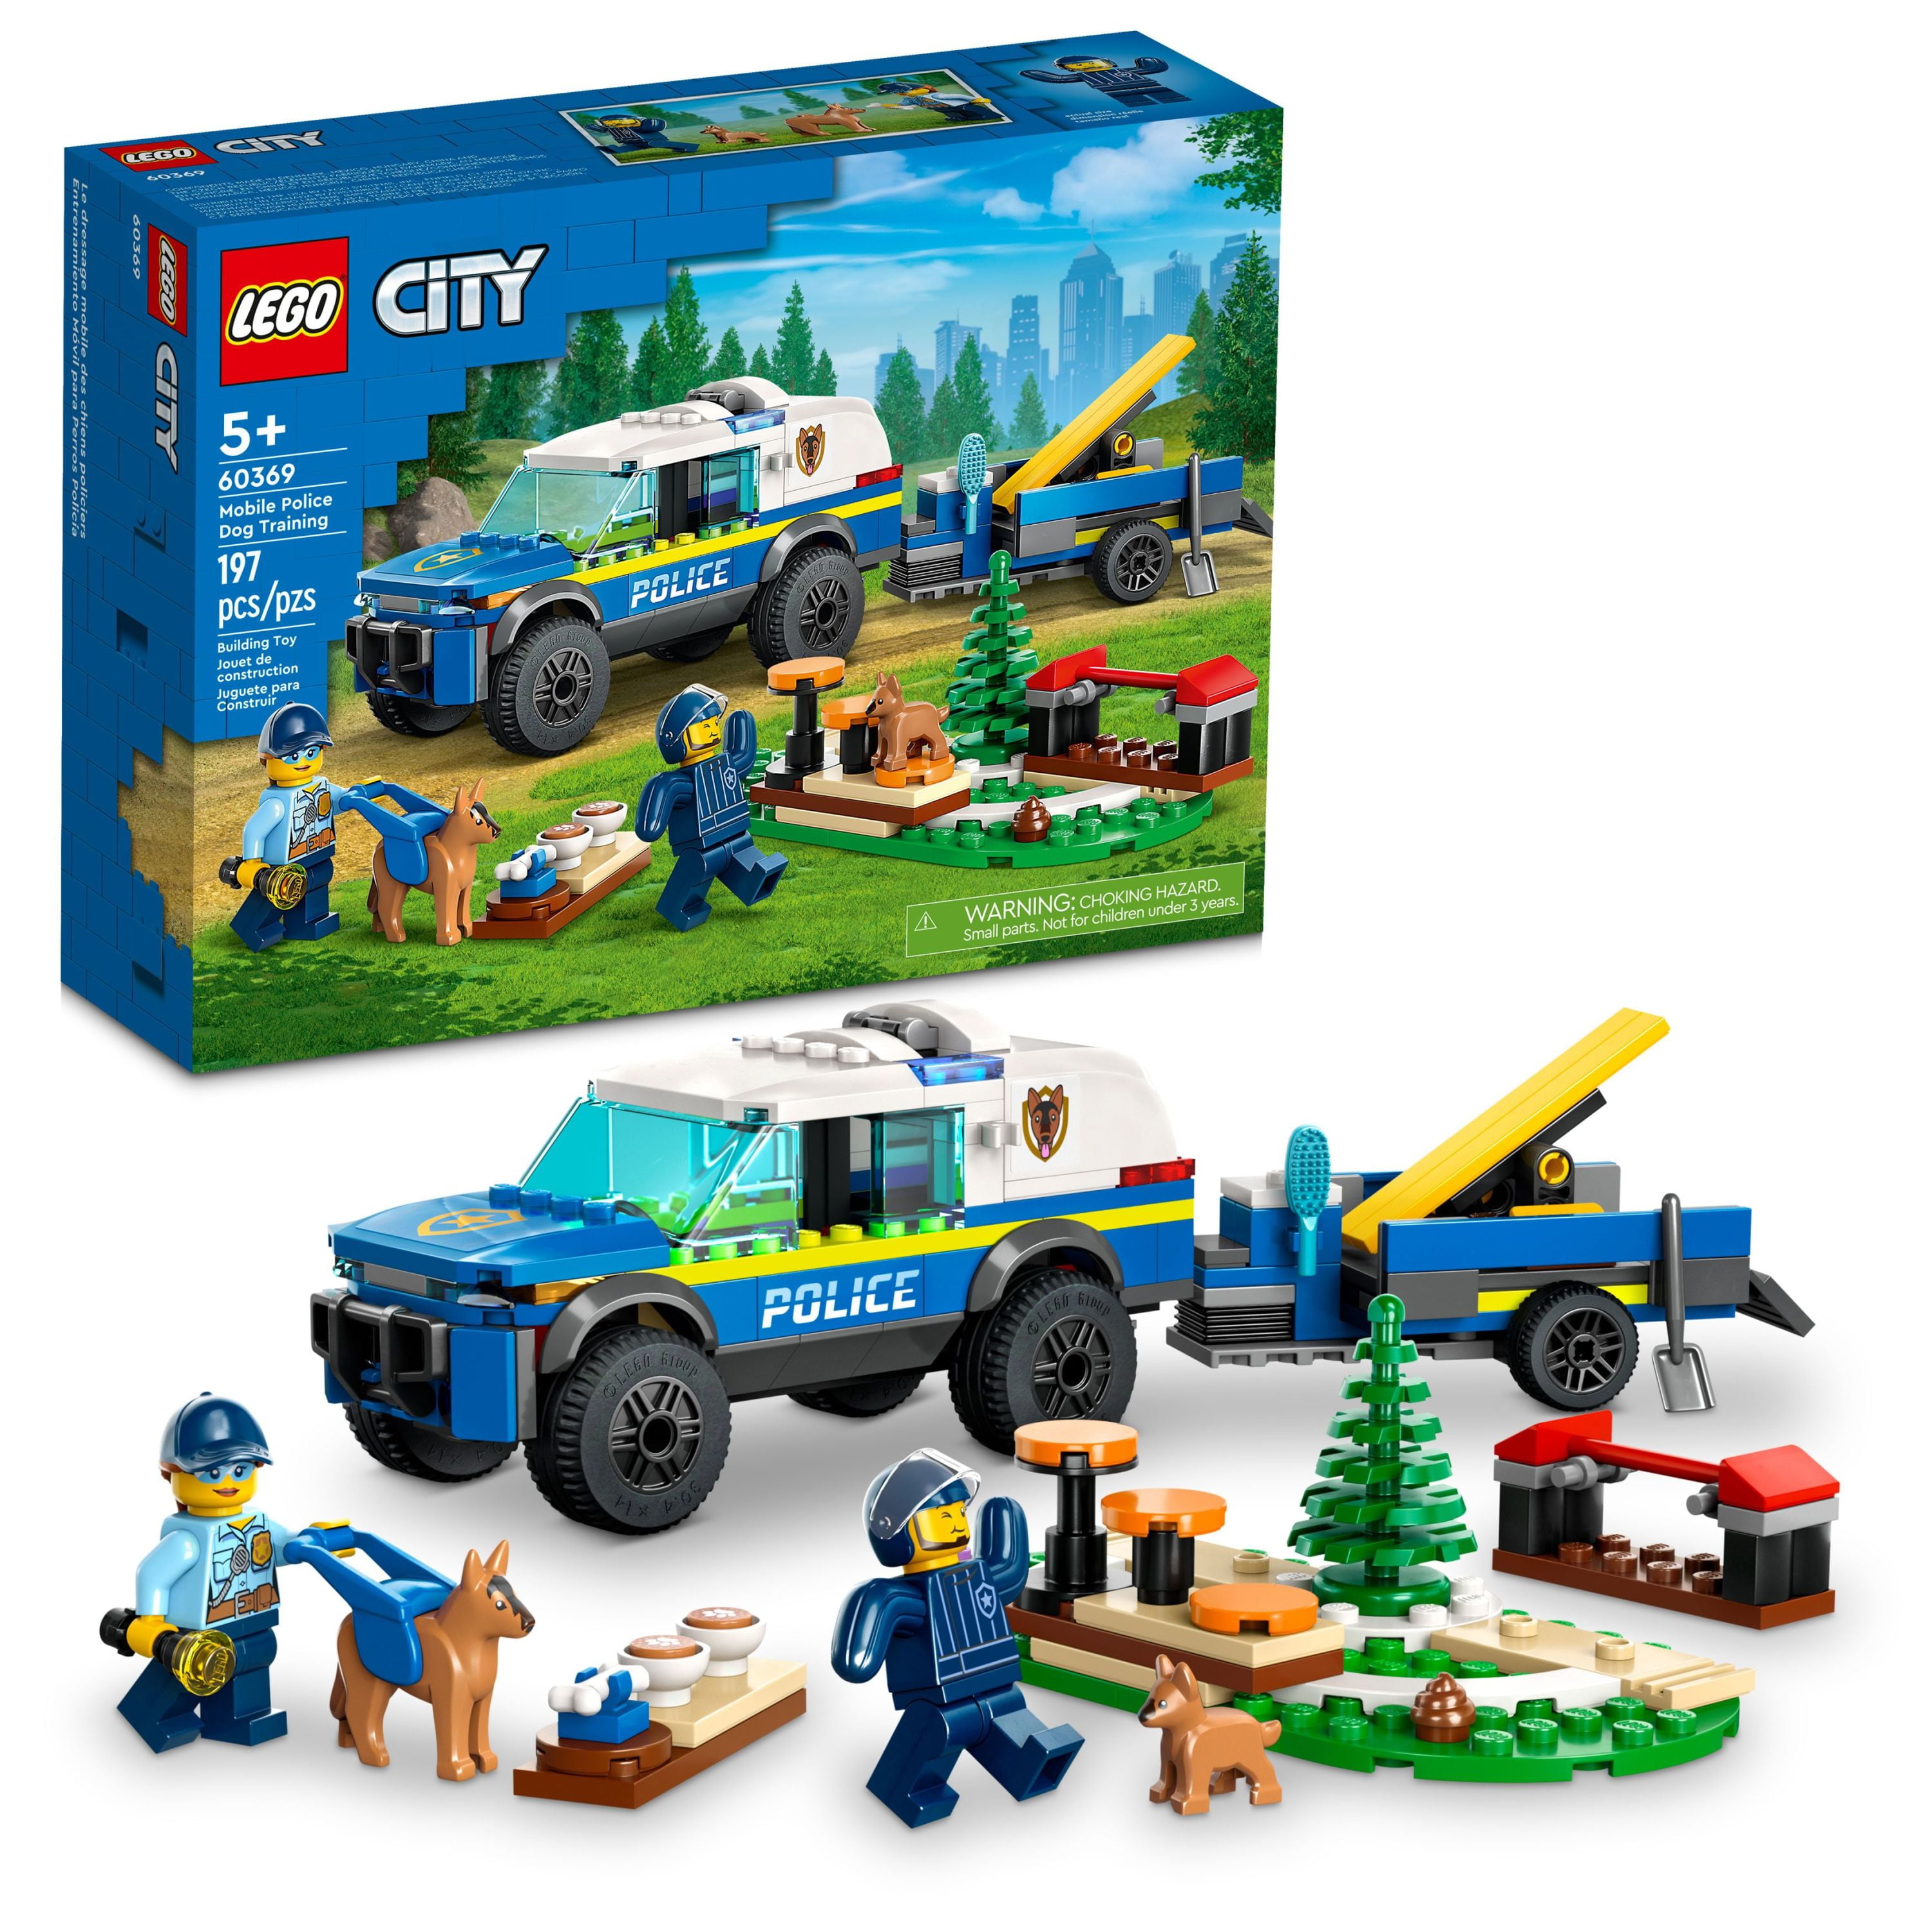 melodisk Stramme Footpad LEGO City Mobile Police Dog Training Set with Toy Car 60369 - Walmart.com